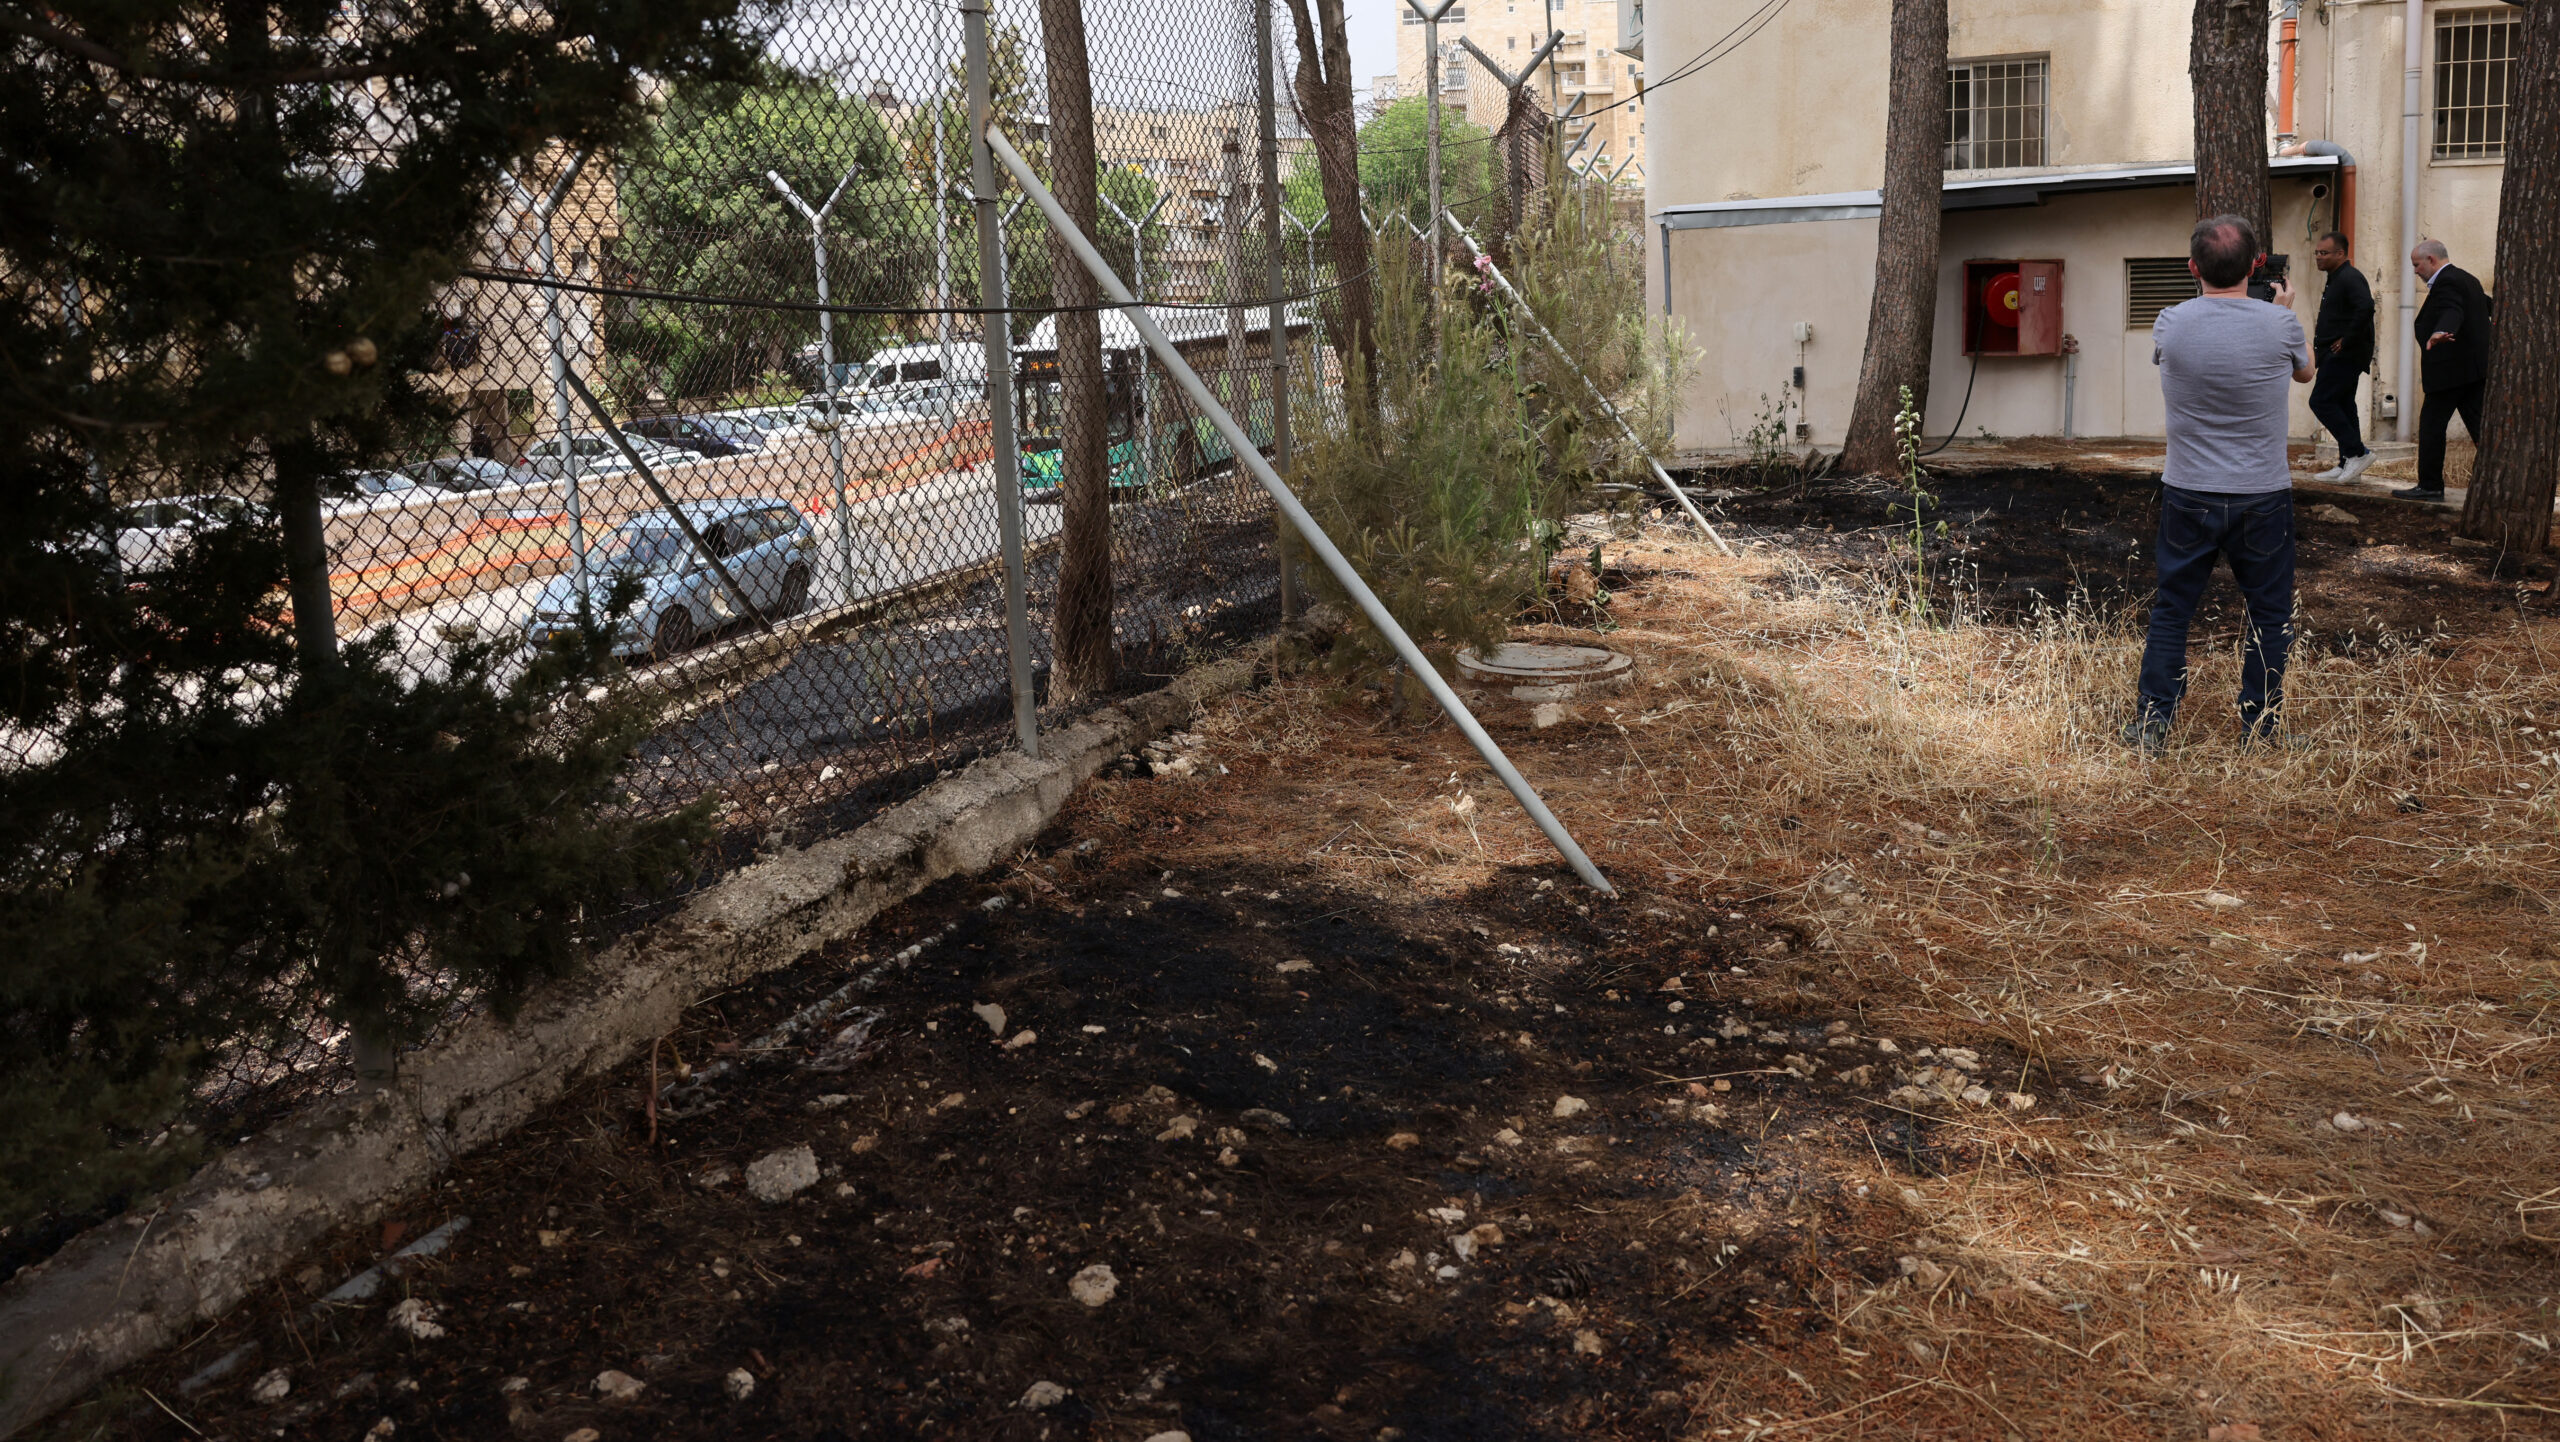 UNRWA Headquarters in Jerusalem Shuts Down After Arson Attacks Attributed to Israelis